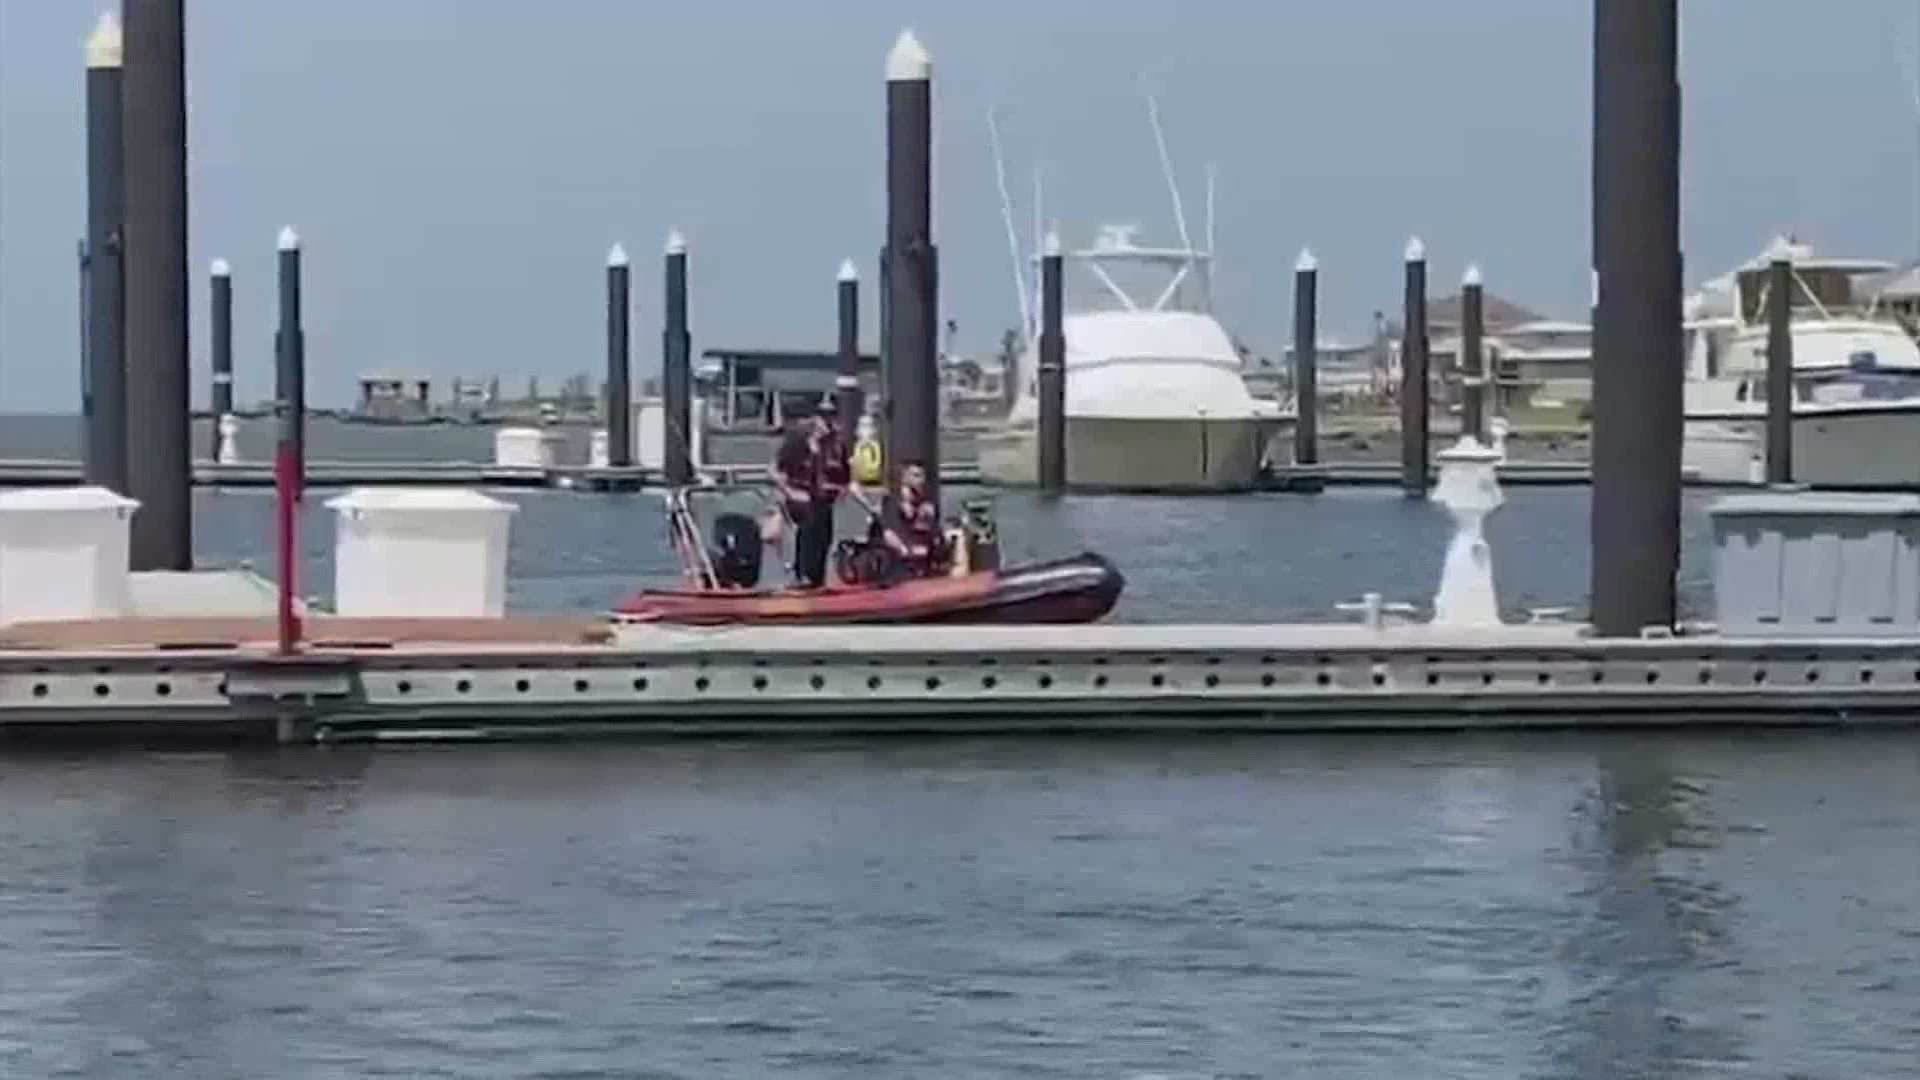 Galveston police are searching for possible witnesses after a man who went overboard in a marina Saturday morning was later found dead in the water.